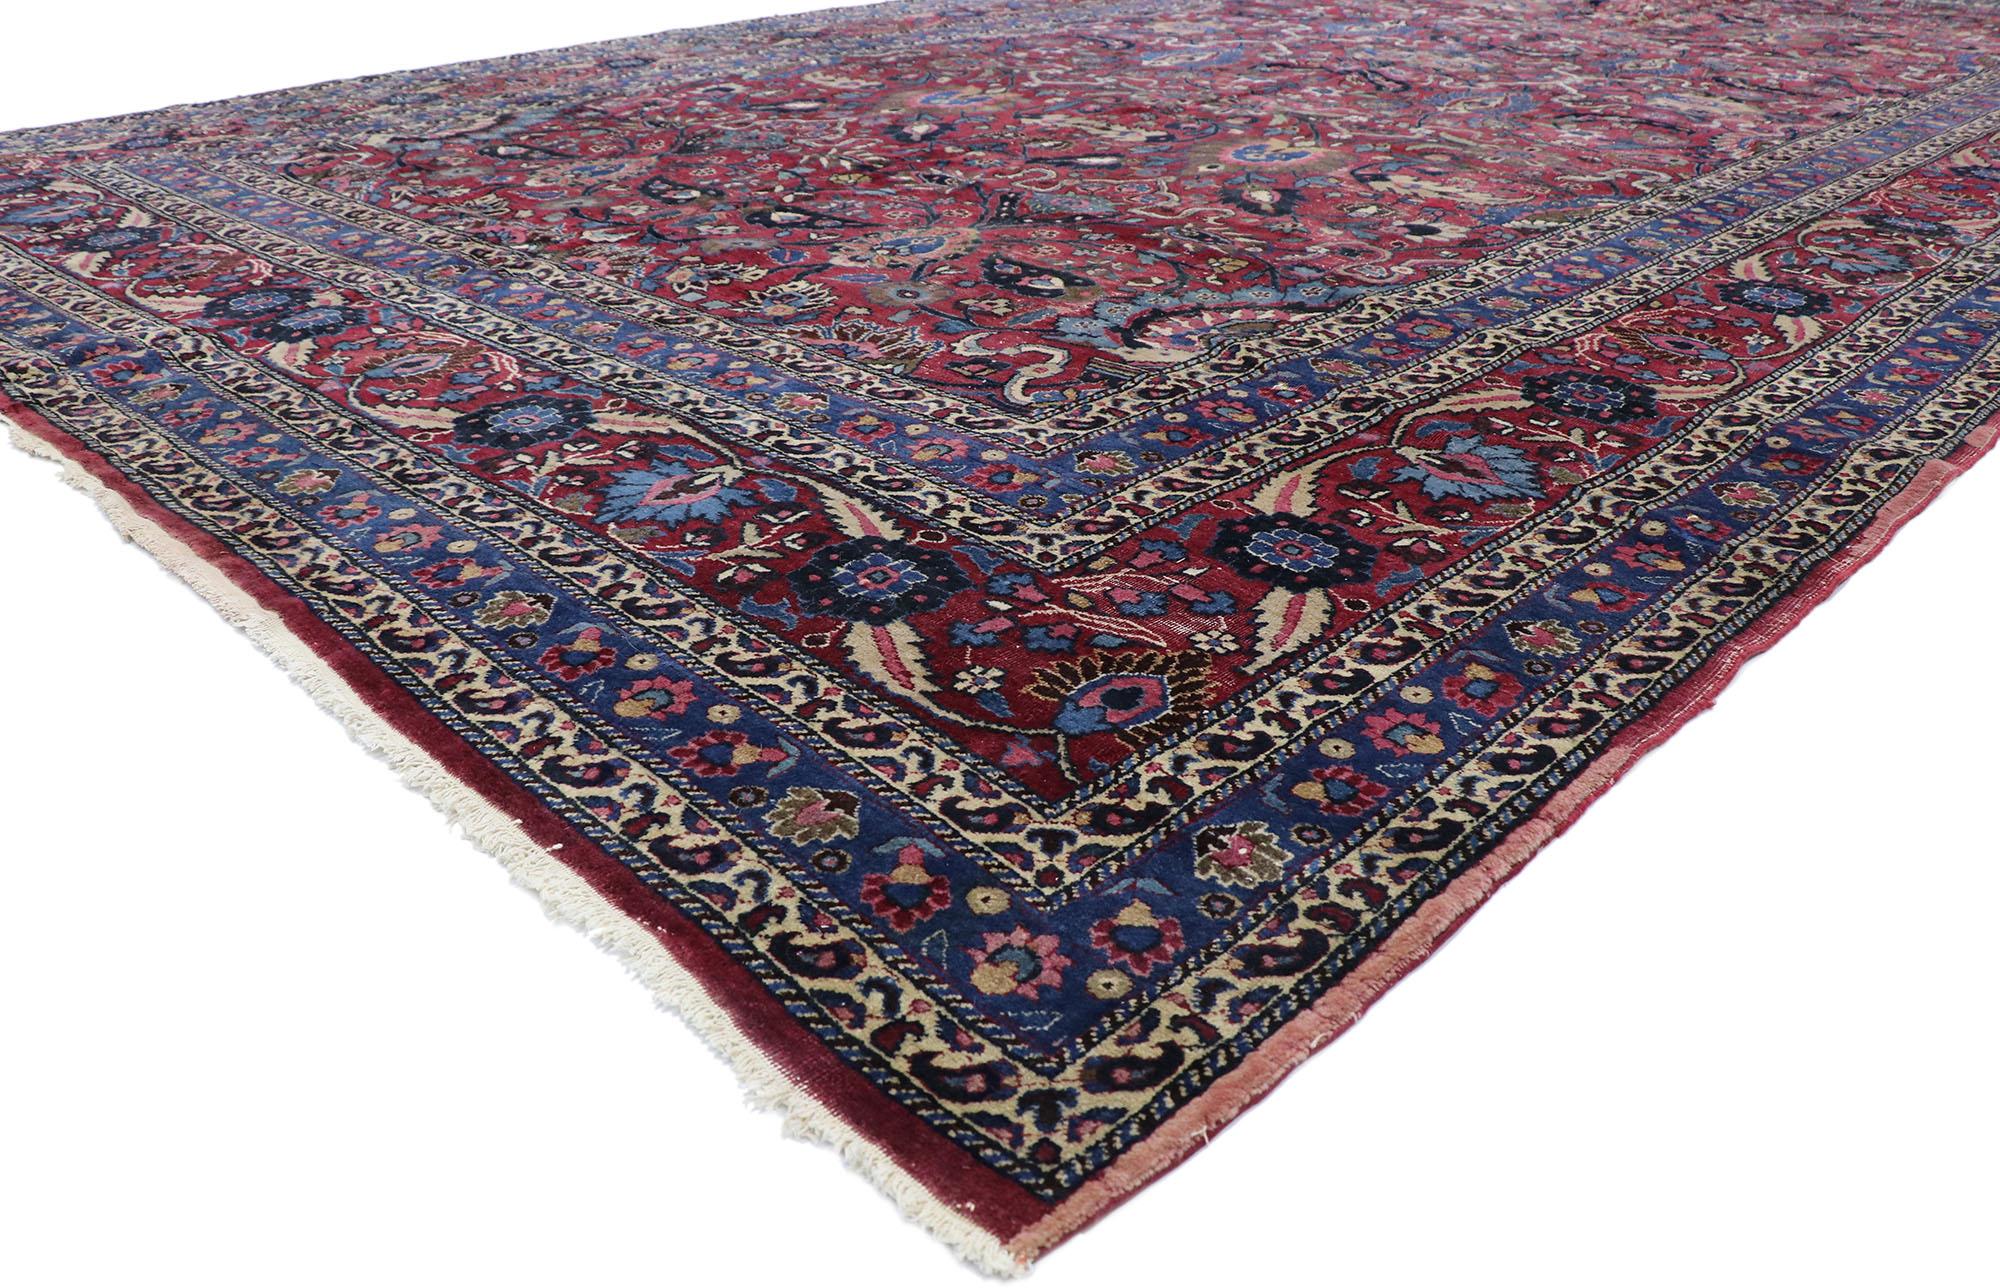 ?78067 Distressed Antique Persian Mashhad rug with Rustic Victorian Style 10'05 x 18'11. ??With its beguiling beauty, lovingly time-worn composition, and rich jewel-tones, this hand-knotted wool antique Persian Mashhad rug is poised to impress. The